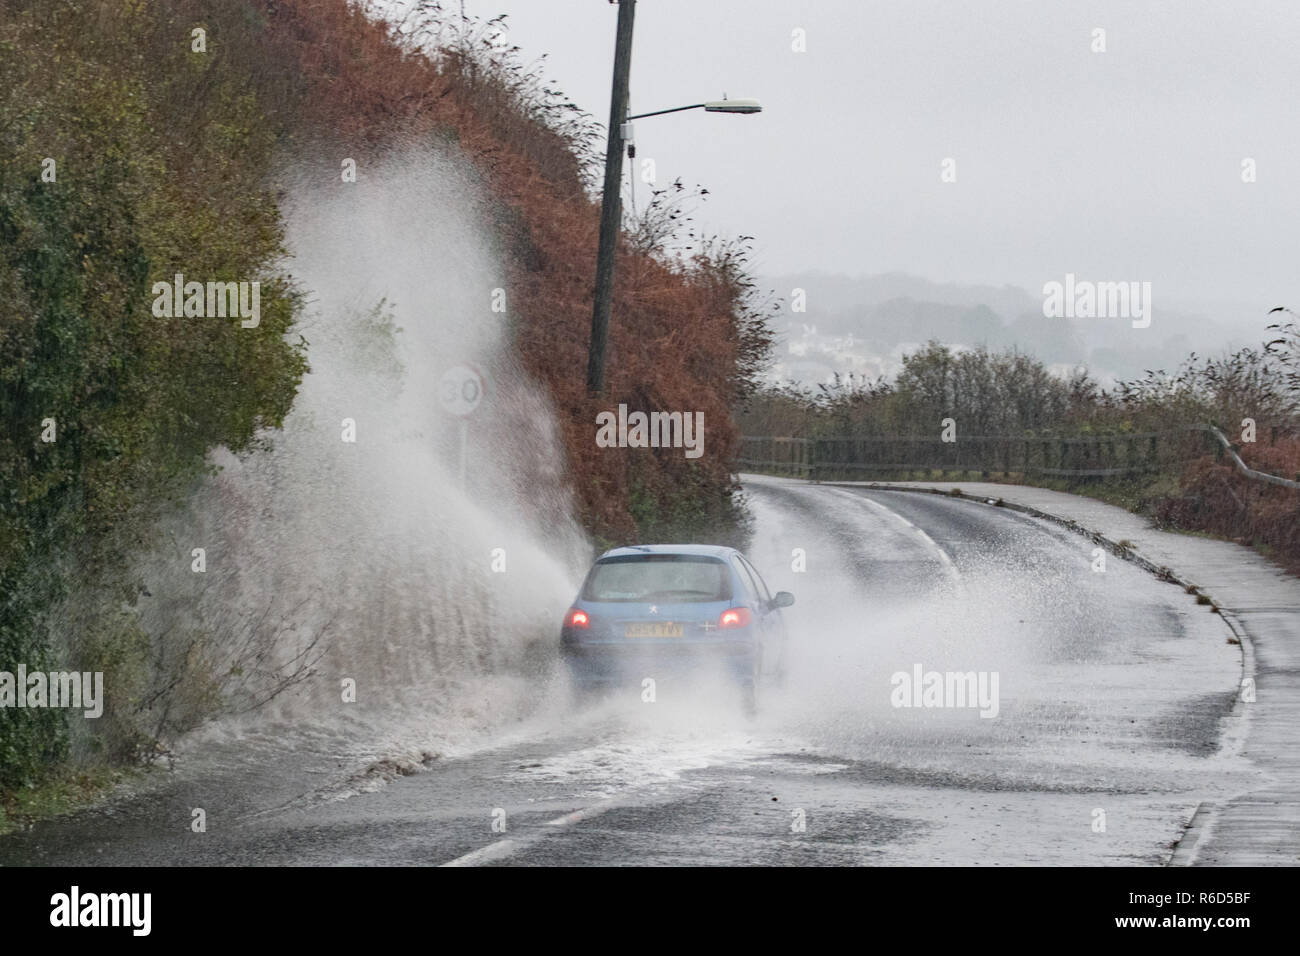 Car driving through a large puddle in the road spraying up water Stock Photo